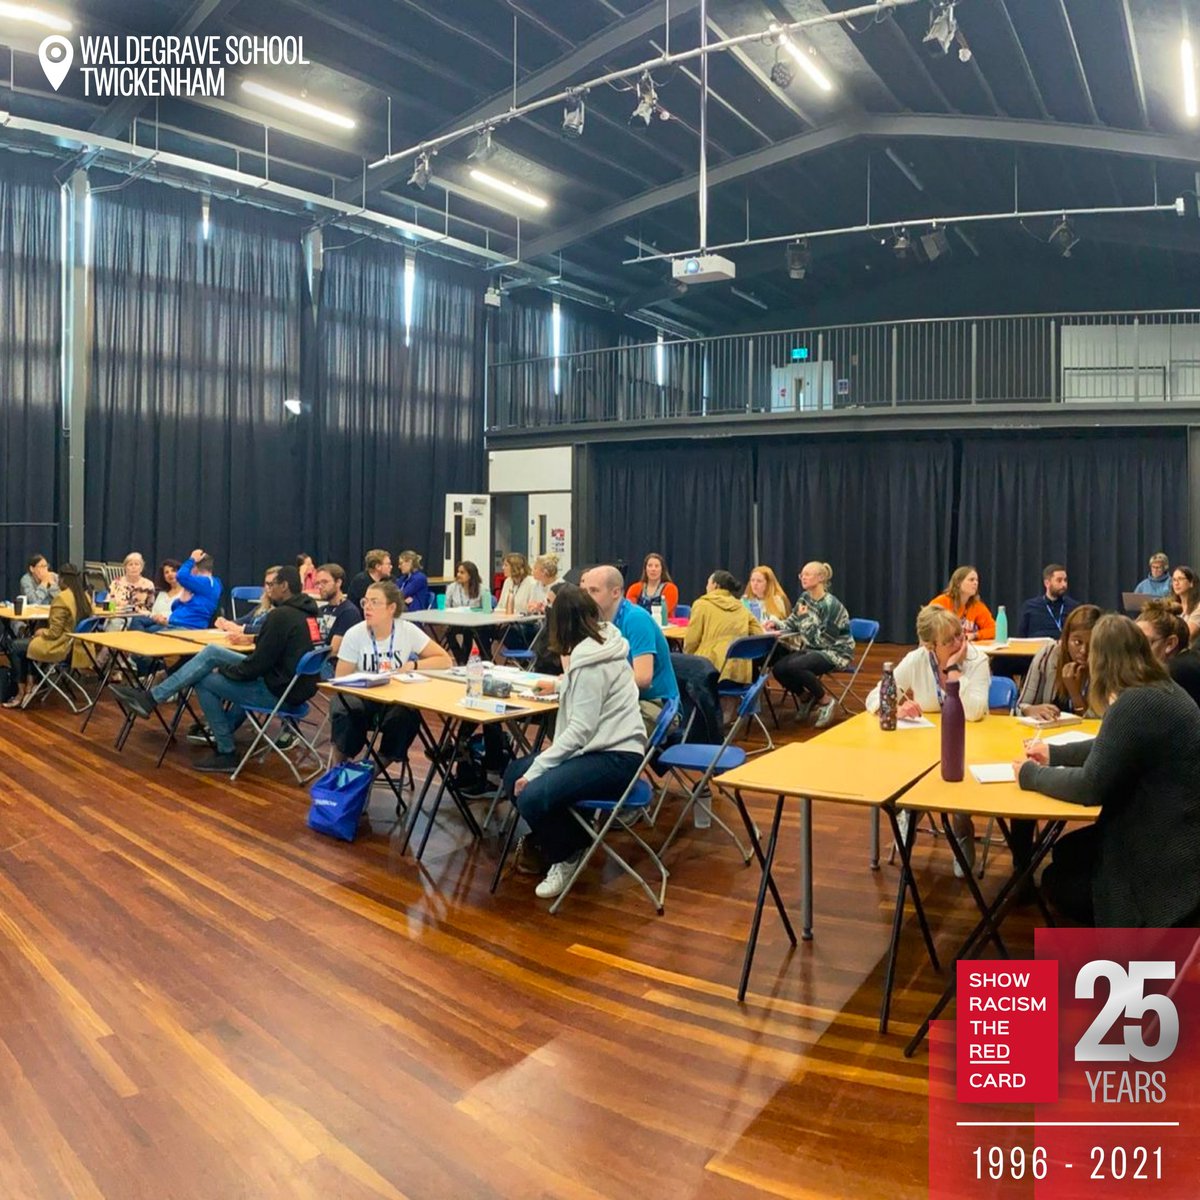 As young people head back into the classroom, this week our teams held anti-racism teacher training - to enable teachers to better educate, navigate, and handle racism in schools. #SRtRC | #ShowRacismtheRedCard